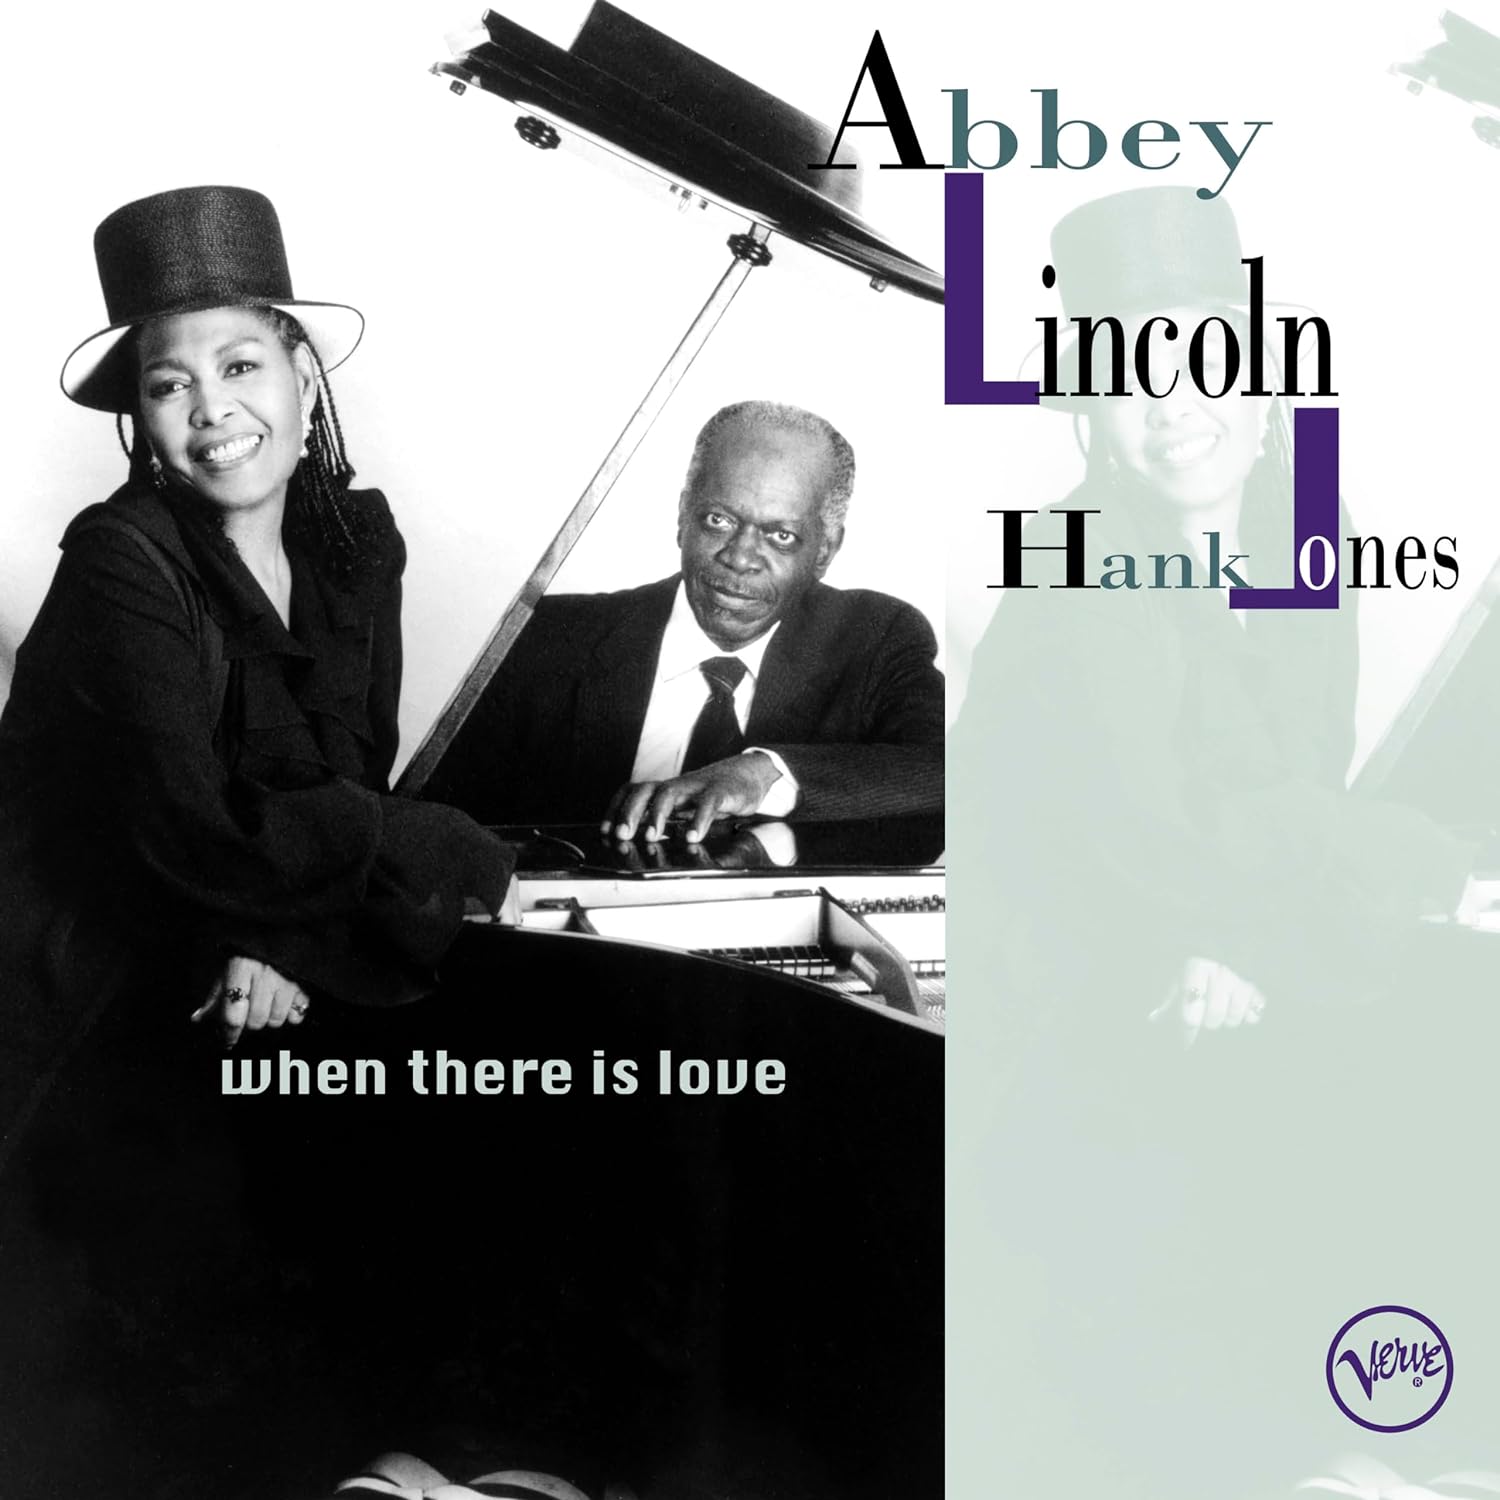 LINCOLD ABBEY/HANK JONES – WHERE THERE IS LOVE LP2